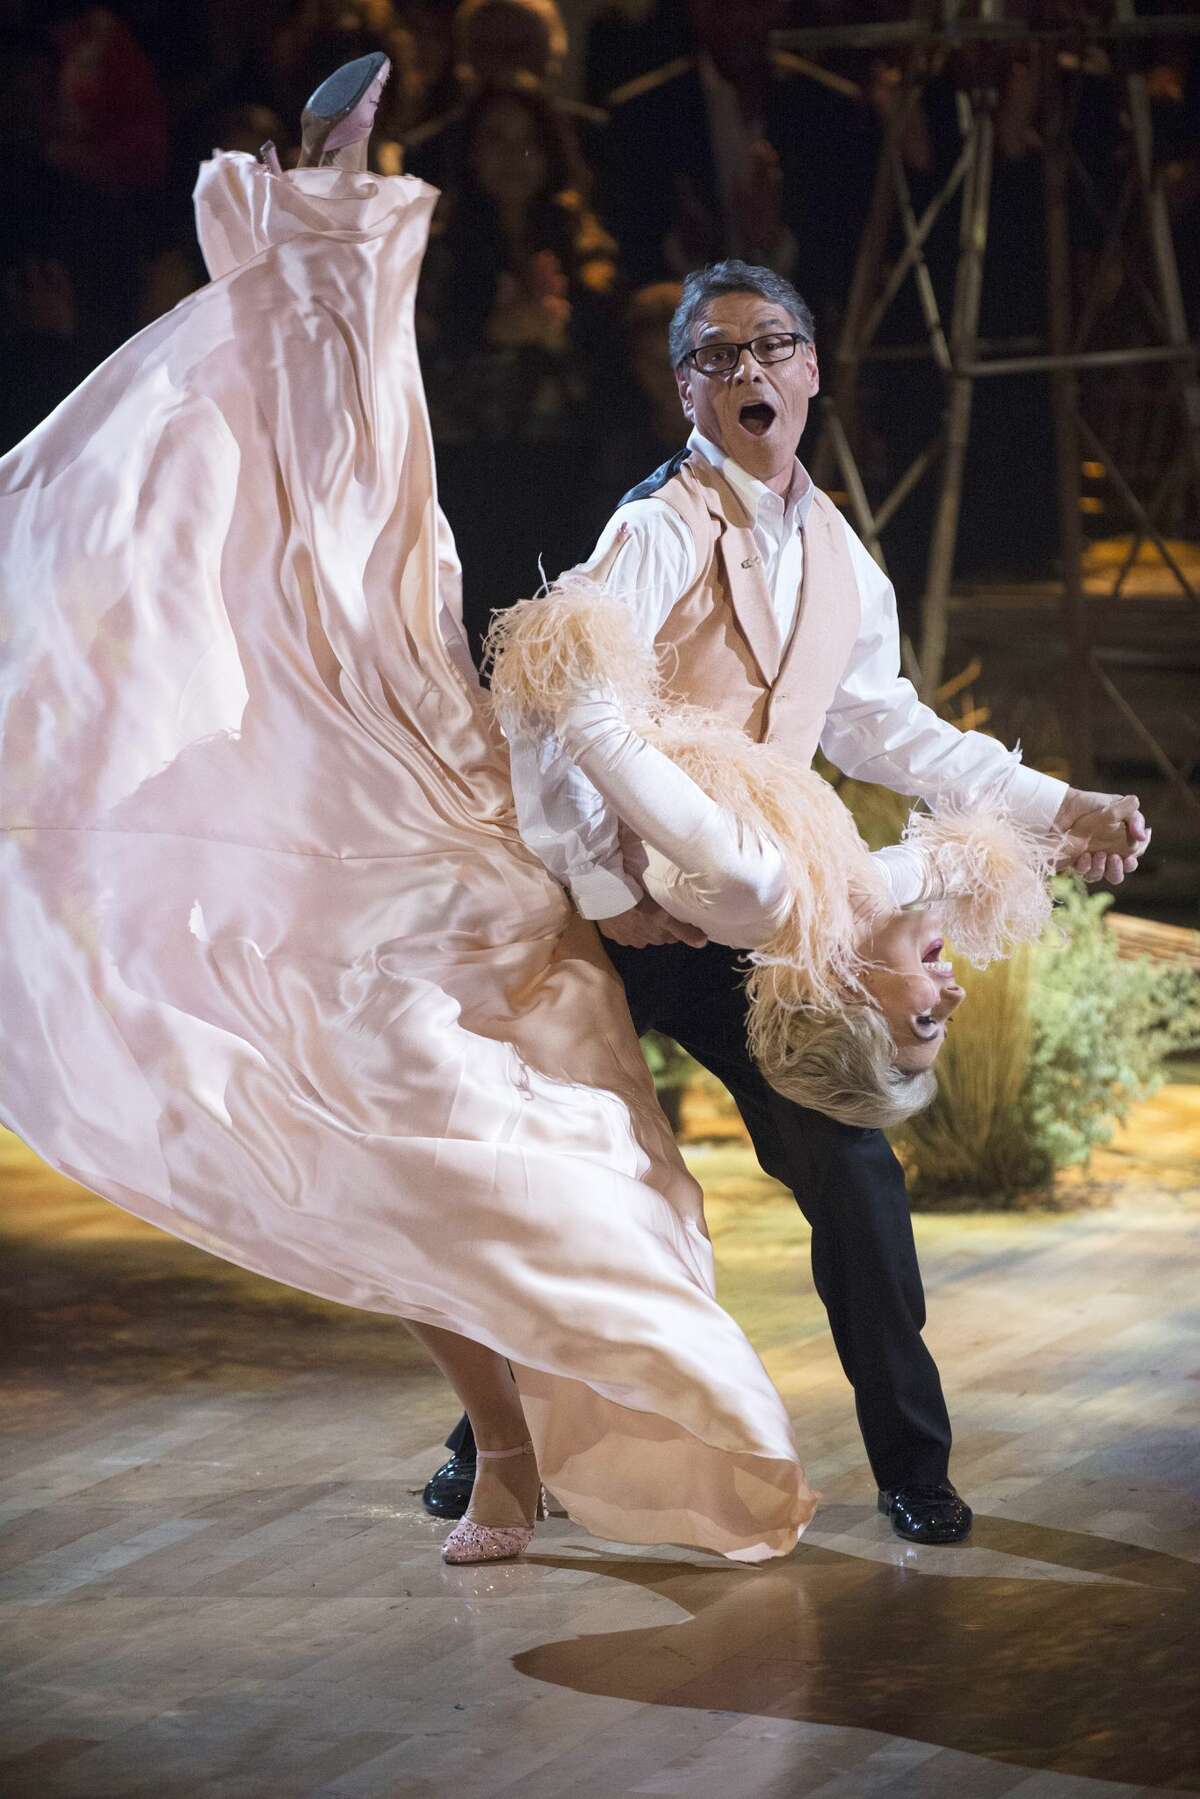 DANCING WITH THE STARS - "Episode 2302" - Rick Perry dips his partner Emma Slater in a farm-set dance to the 'Green Acres' theme song on TV night of the competition show. MONDAY, SEPTEMBER 19 on the ABC Television Network. (ABC/Eric McCandless)